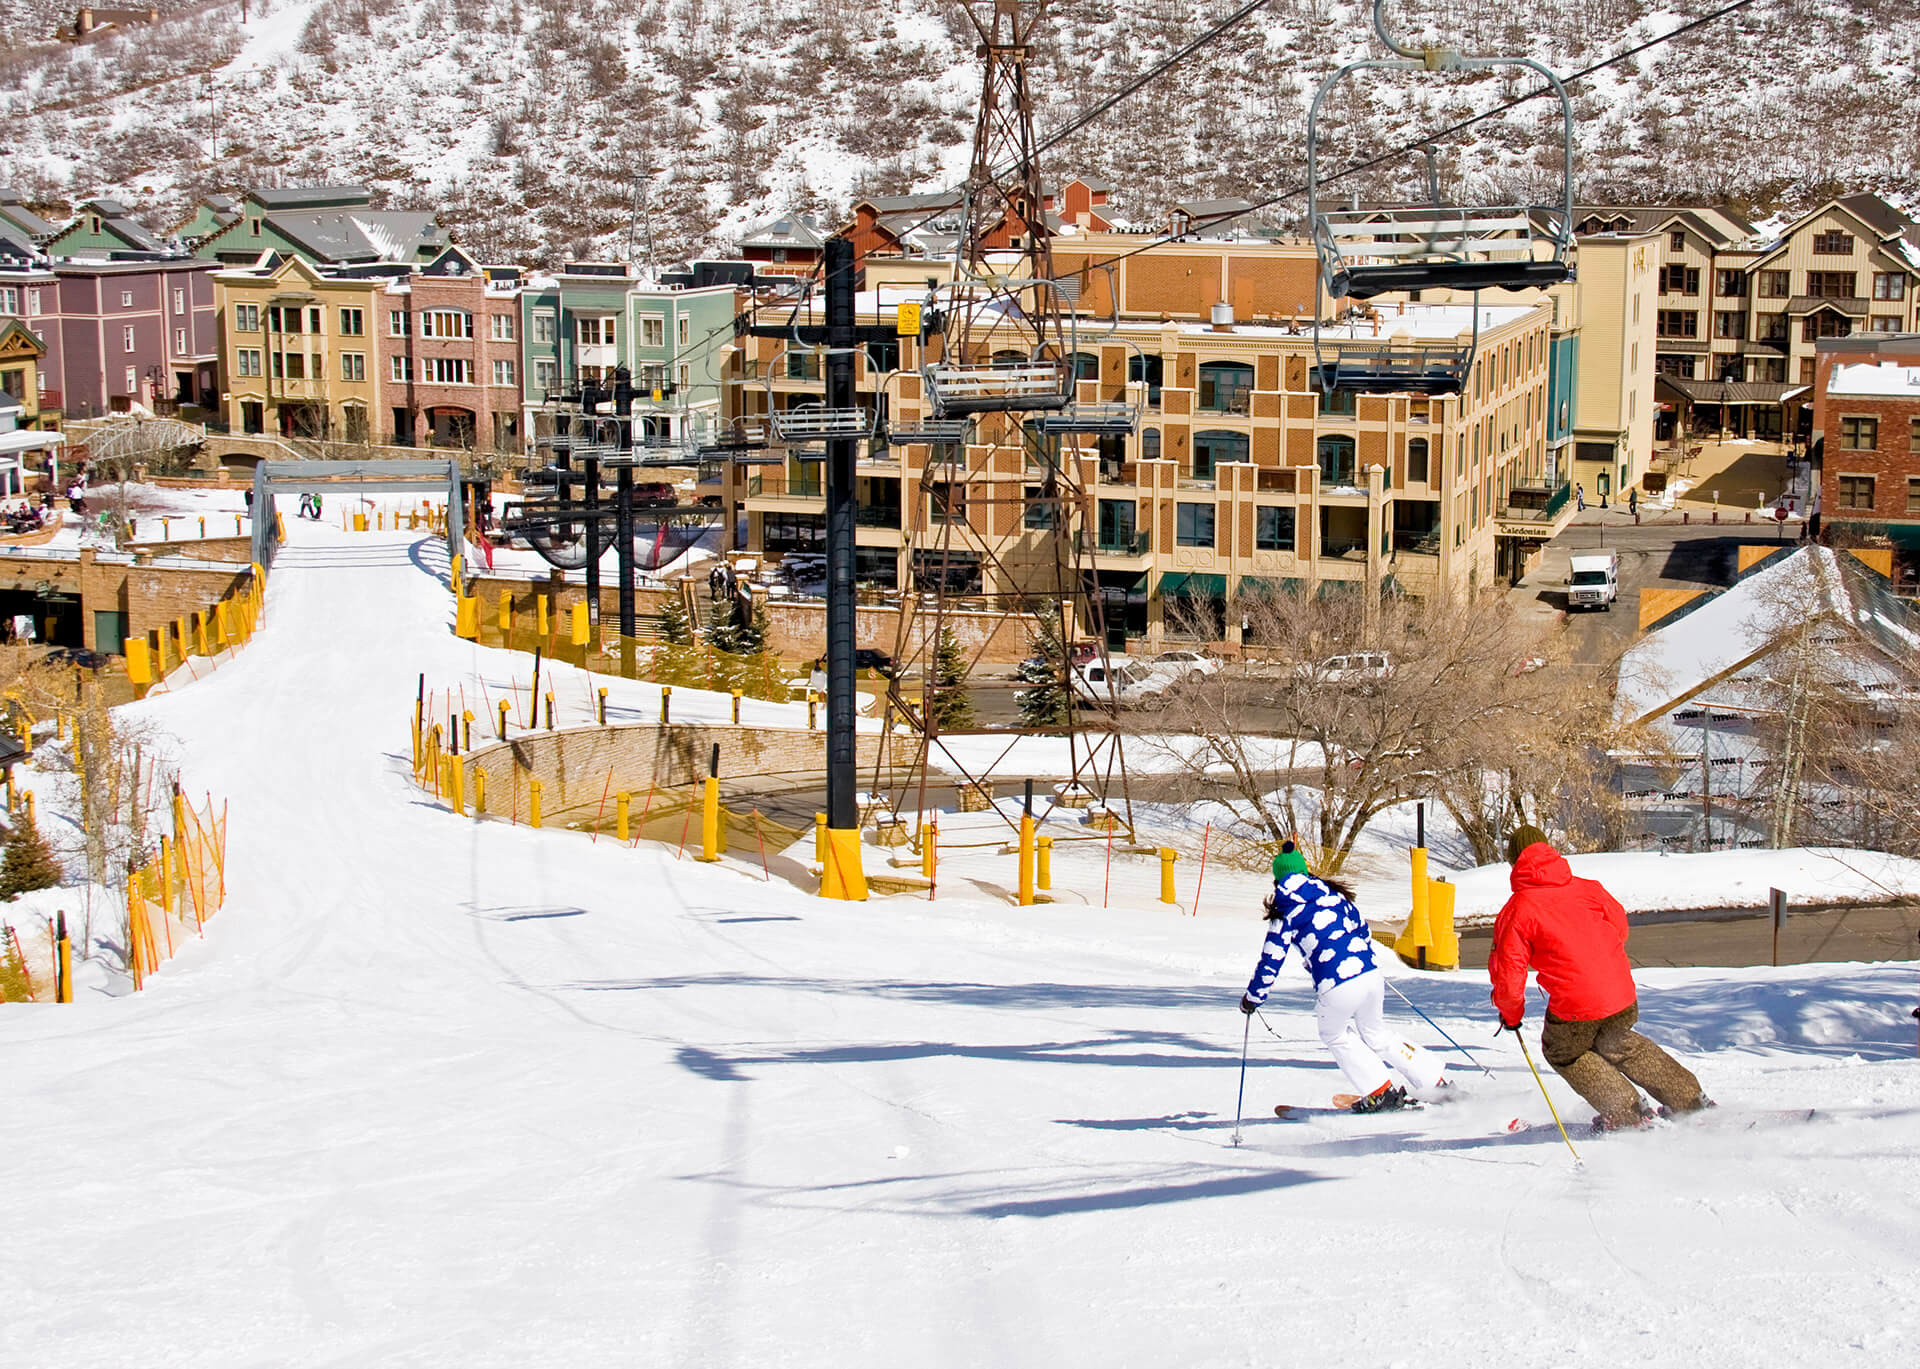 People Skiing to The Caledonian in Park City, Utah